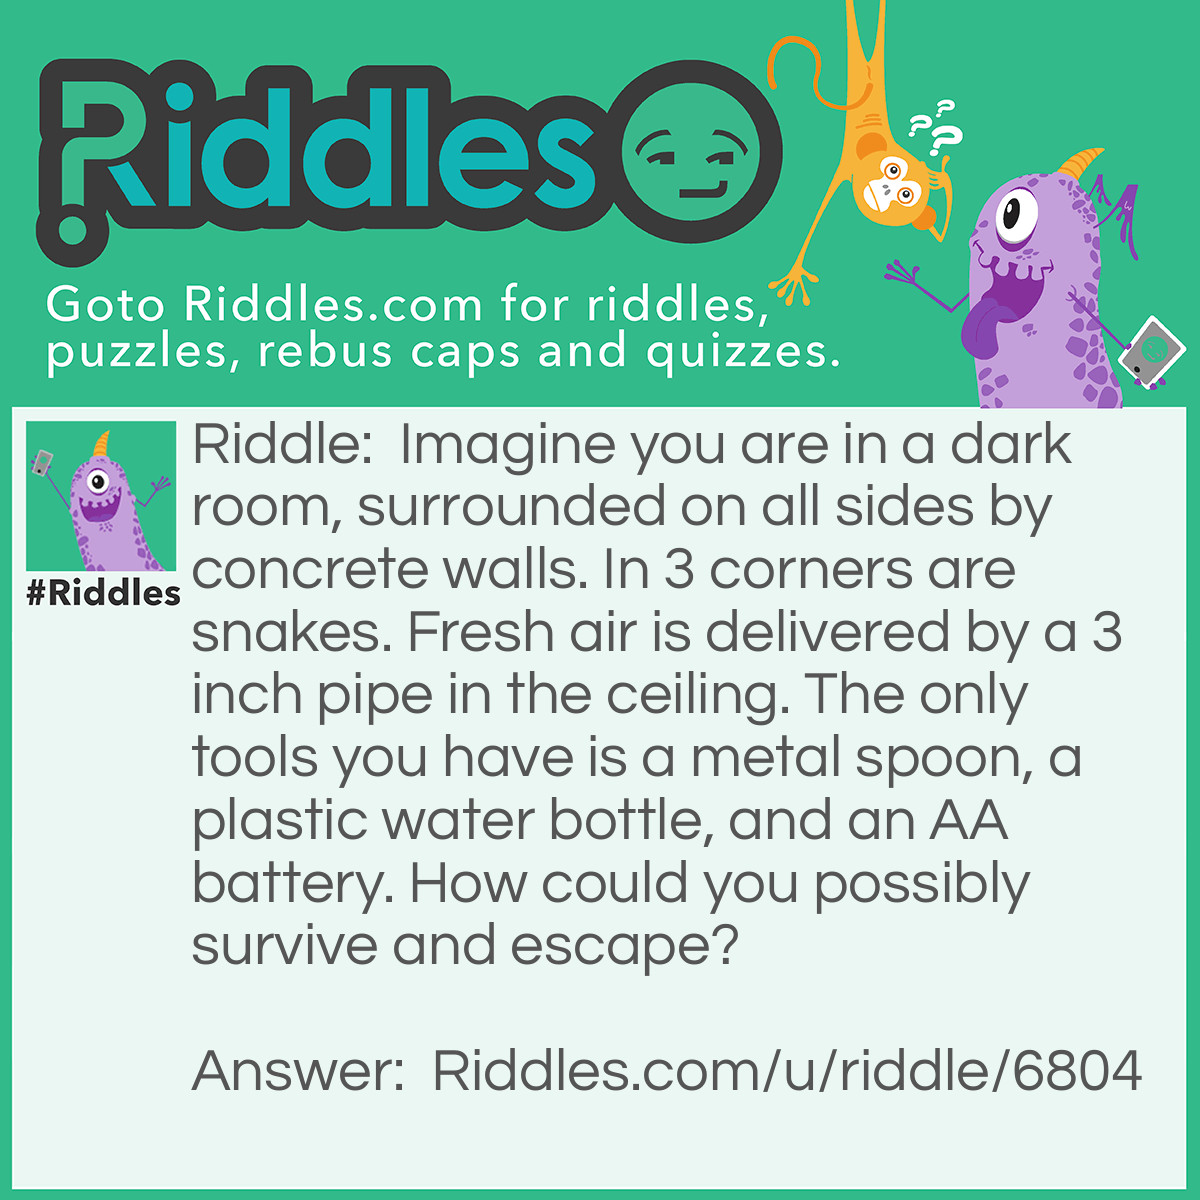 Riddle: Imagine you are in a dark room, surrounded on all sides by concrete walls. In 3 corners are snakes. Fresh air is delivered by a 3 inch pipe in the ceiling. The only tools you have is a metal spoon, a plastic water bottle, and an AA battery. How could you possibly survive and escape? Answer: Don’t imagine such horrible things!